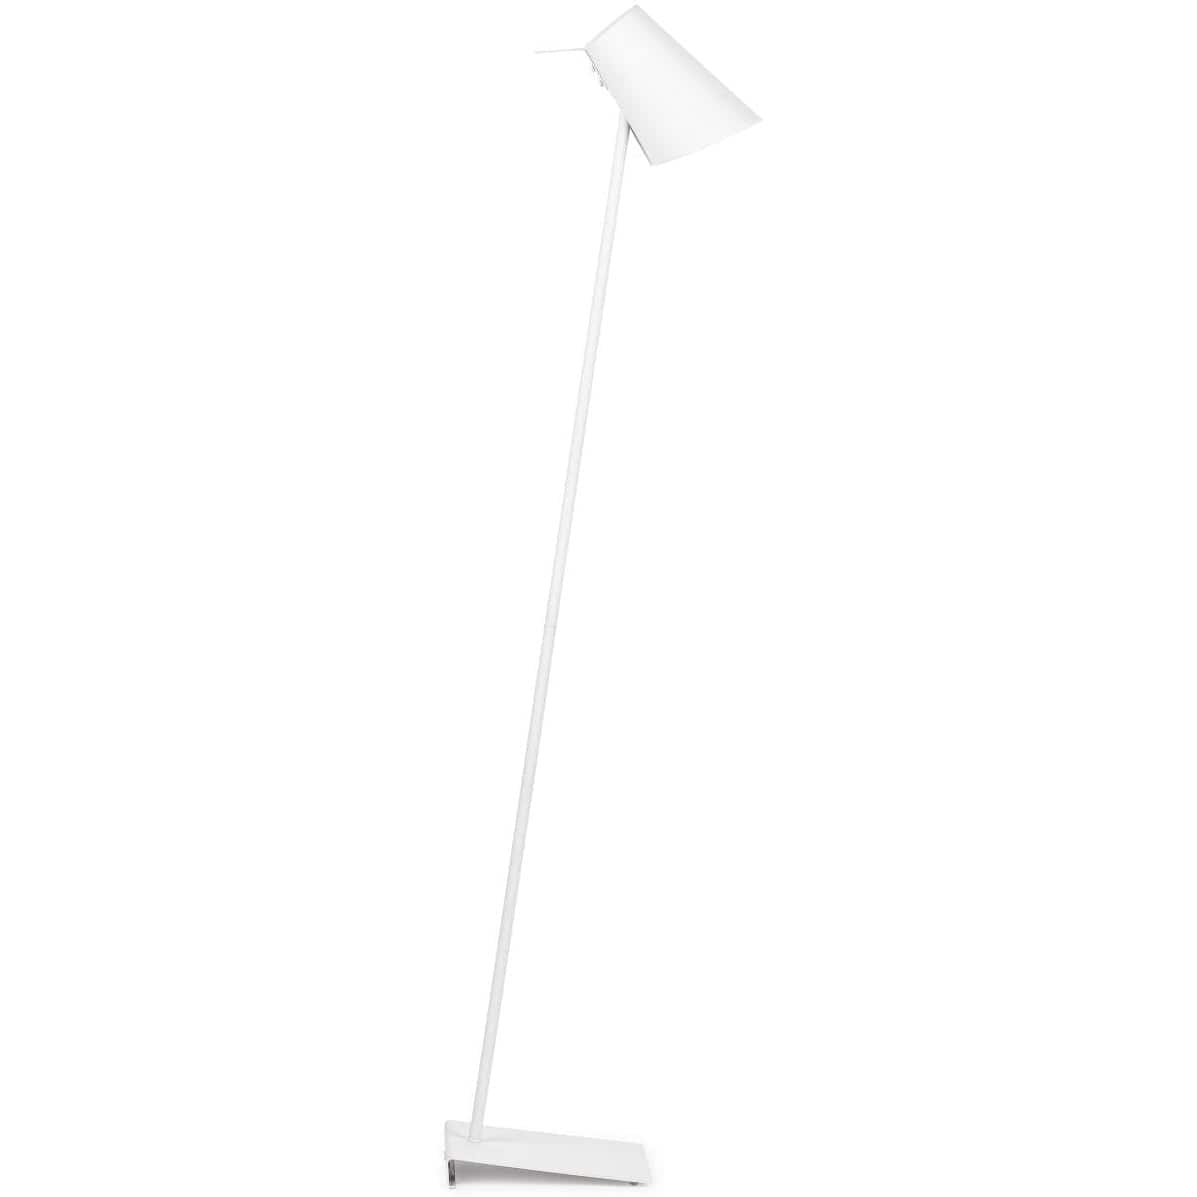 It's About RoMi Floor Lamp White Cardiff Rubber Finish Floor Lamp, white, grey or black